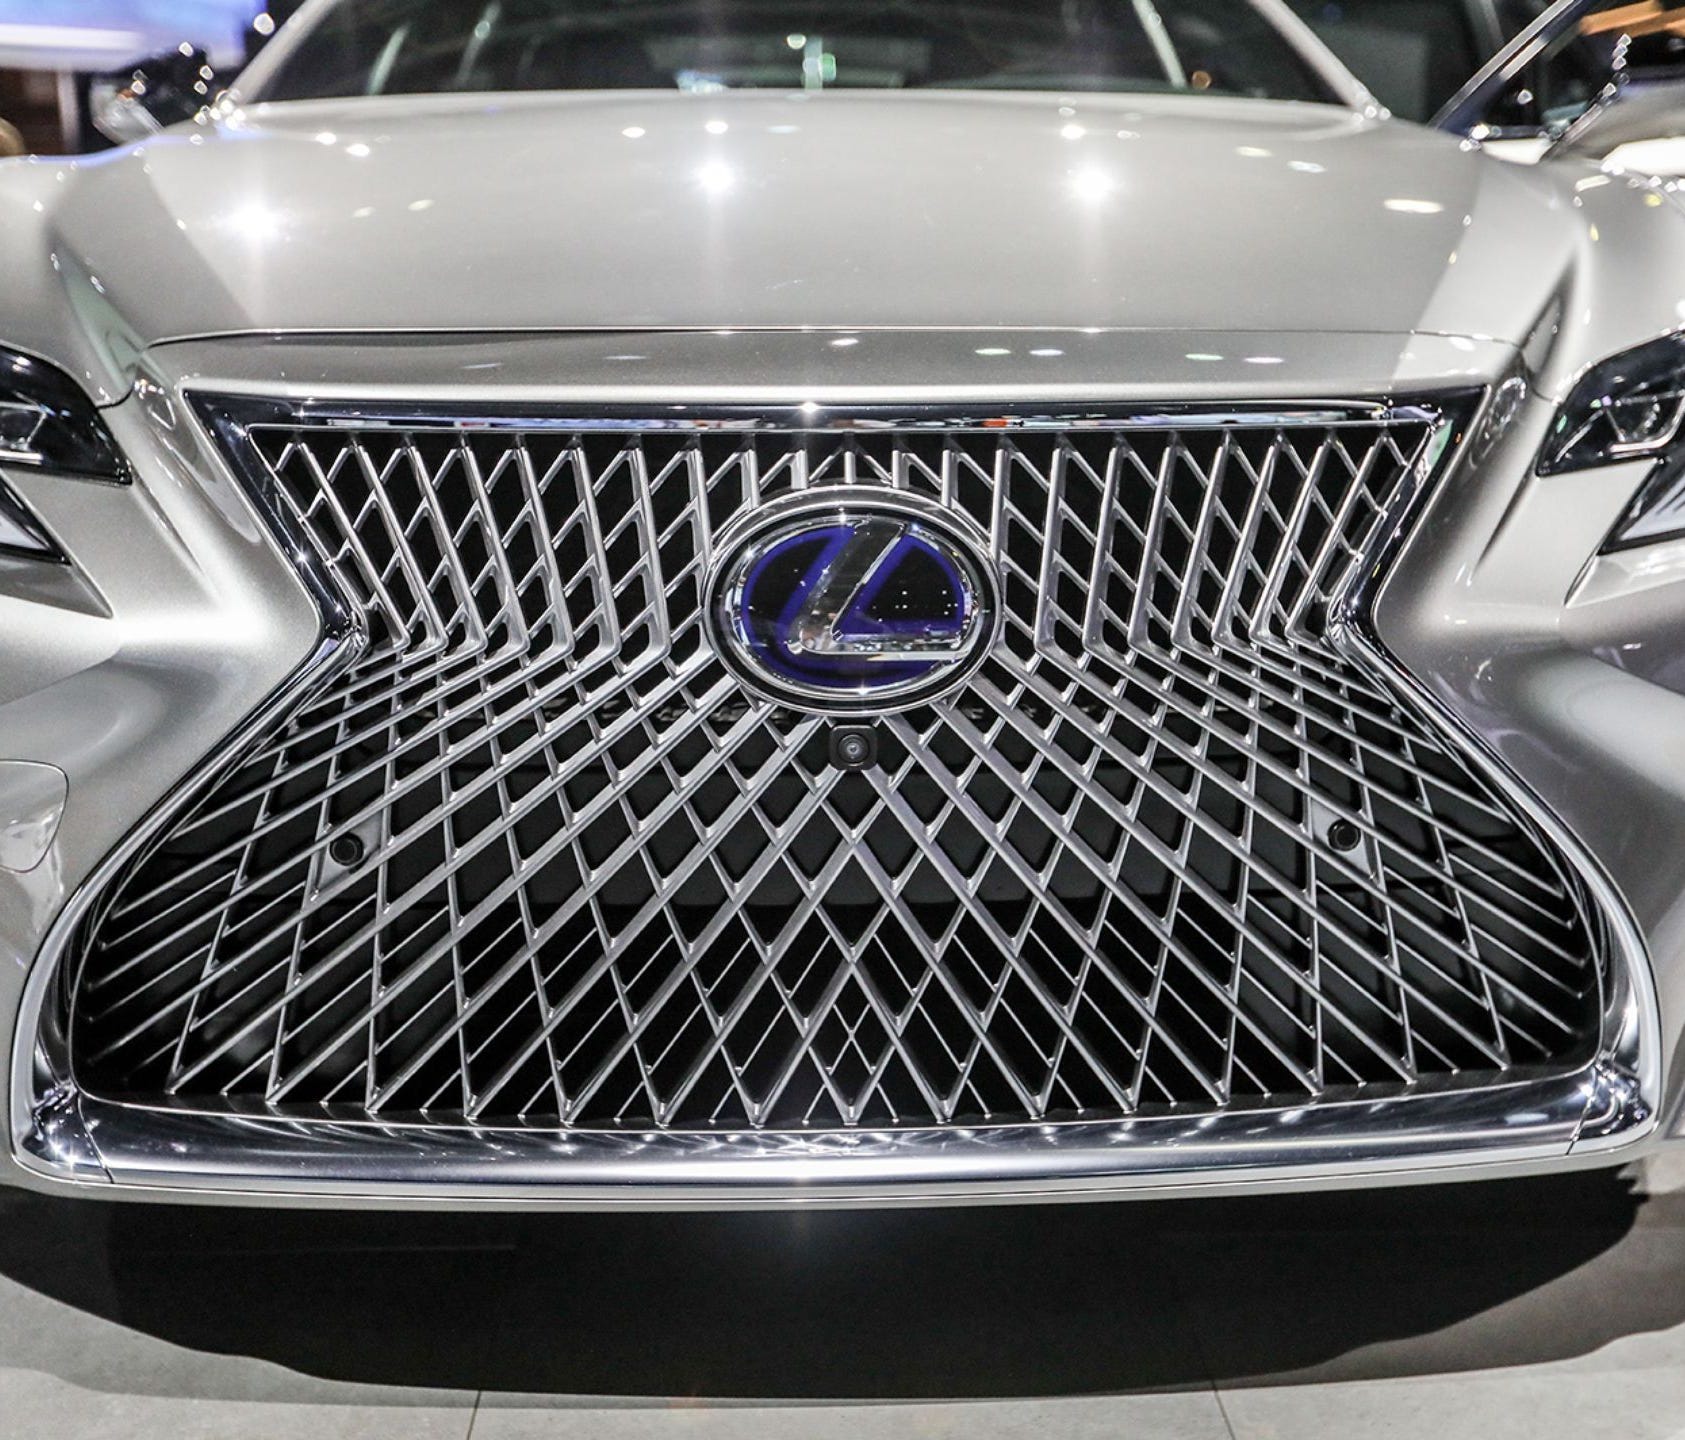 The grille of the 2019 Lexus LS 500h at the North American International Auto Show.